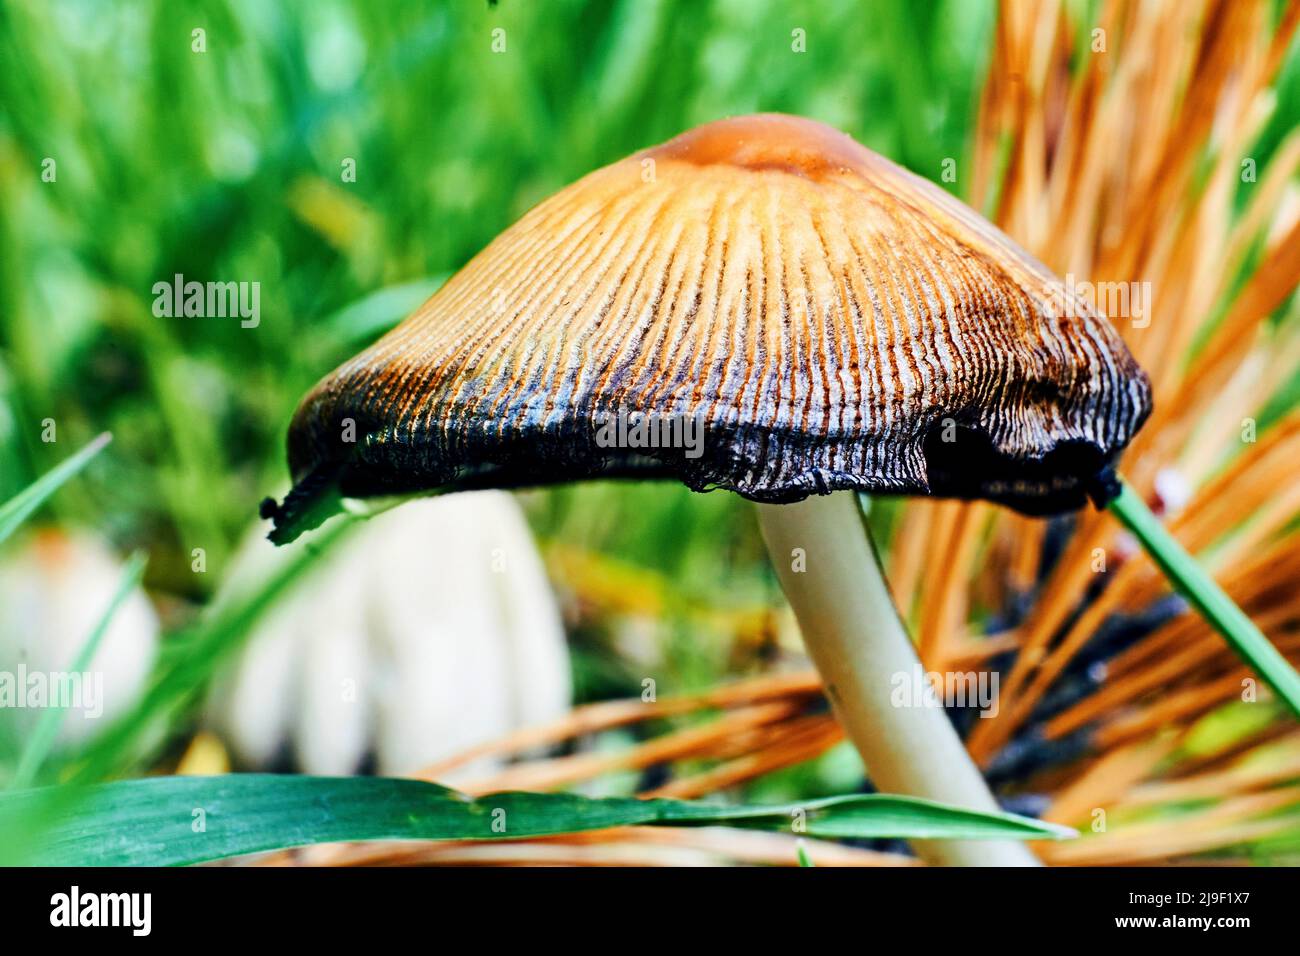 Ginger mushroom among green grass on a sunny summer warm day Stock Photo